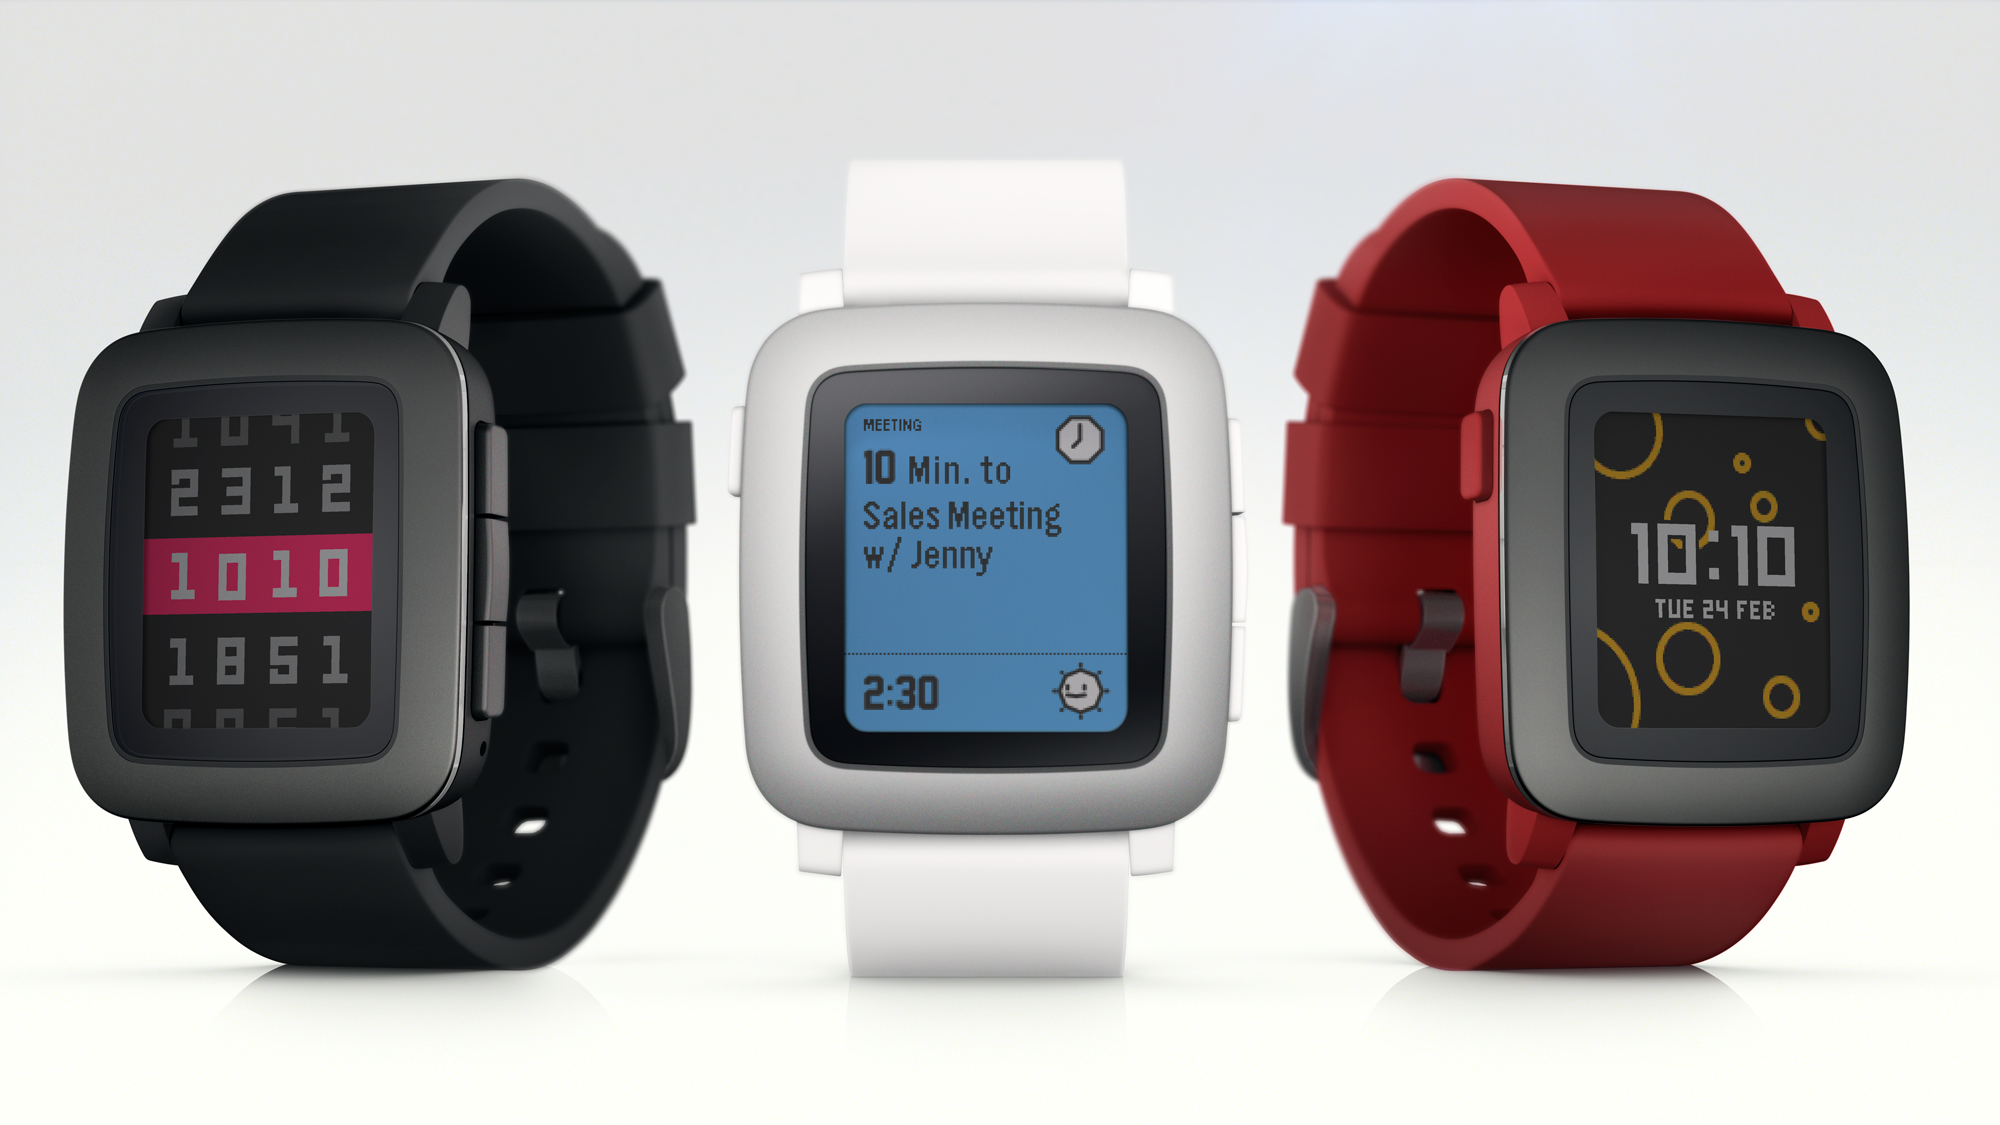 pebble time arrives to give apple watch some serious competition image 1